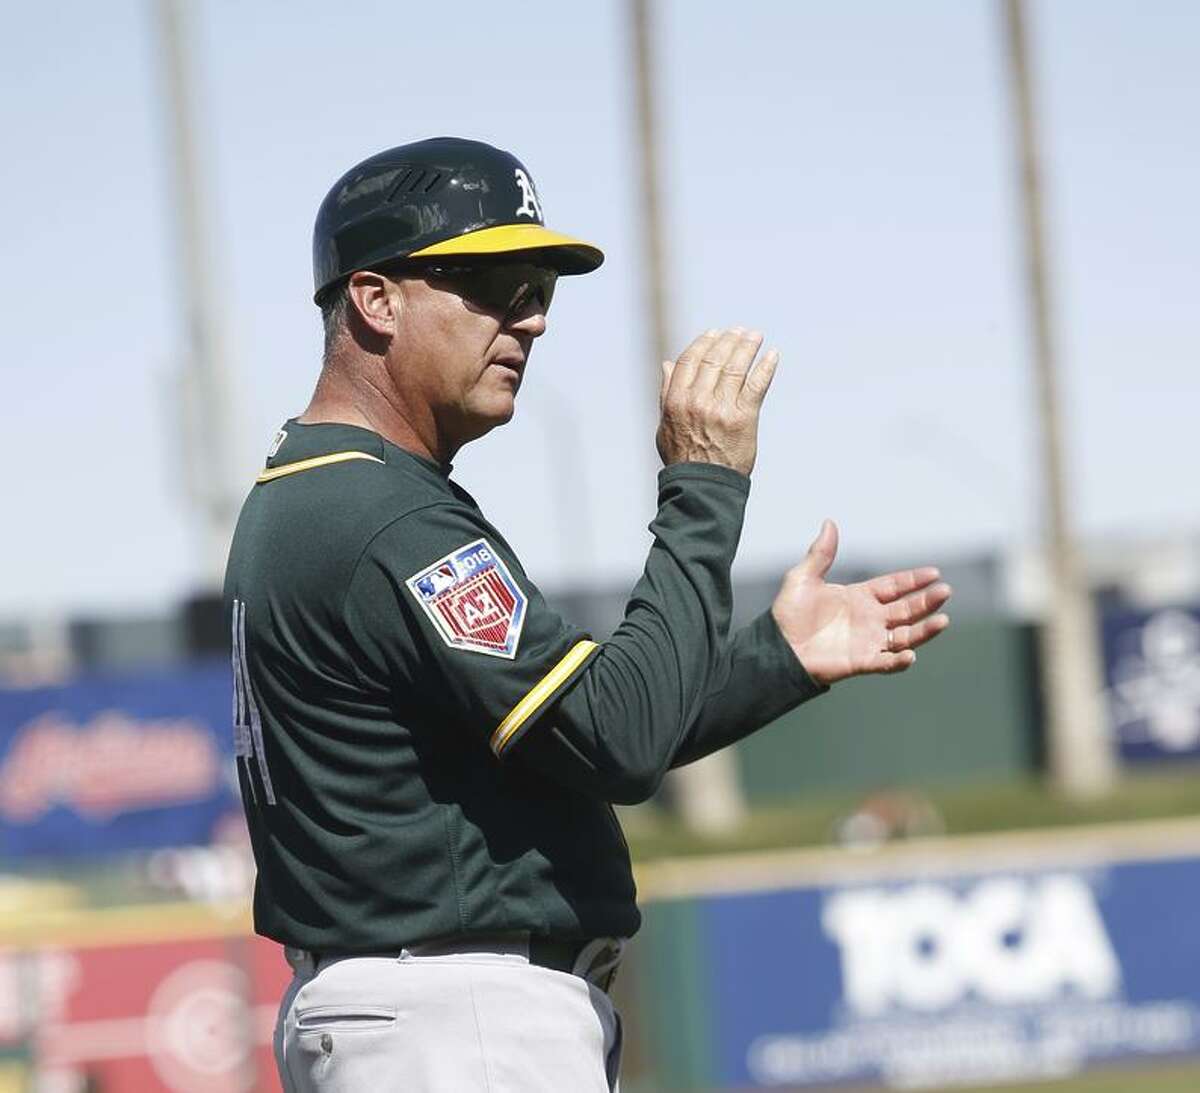 Al Pedrique was born in Venezuela and is fluent in Spanish, a boon for the A’s young Latin players.